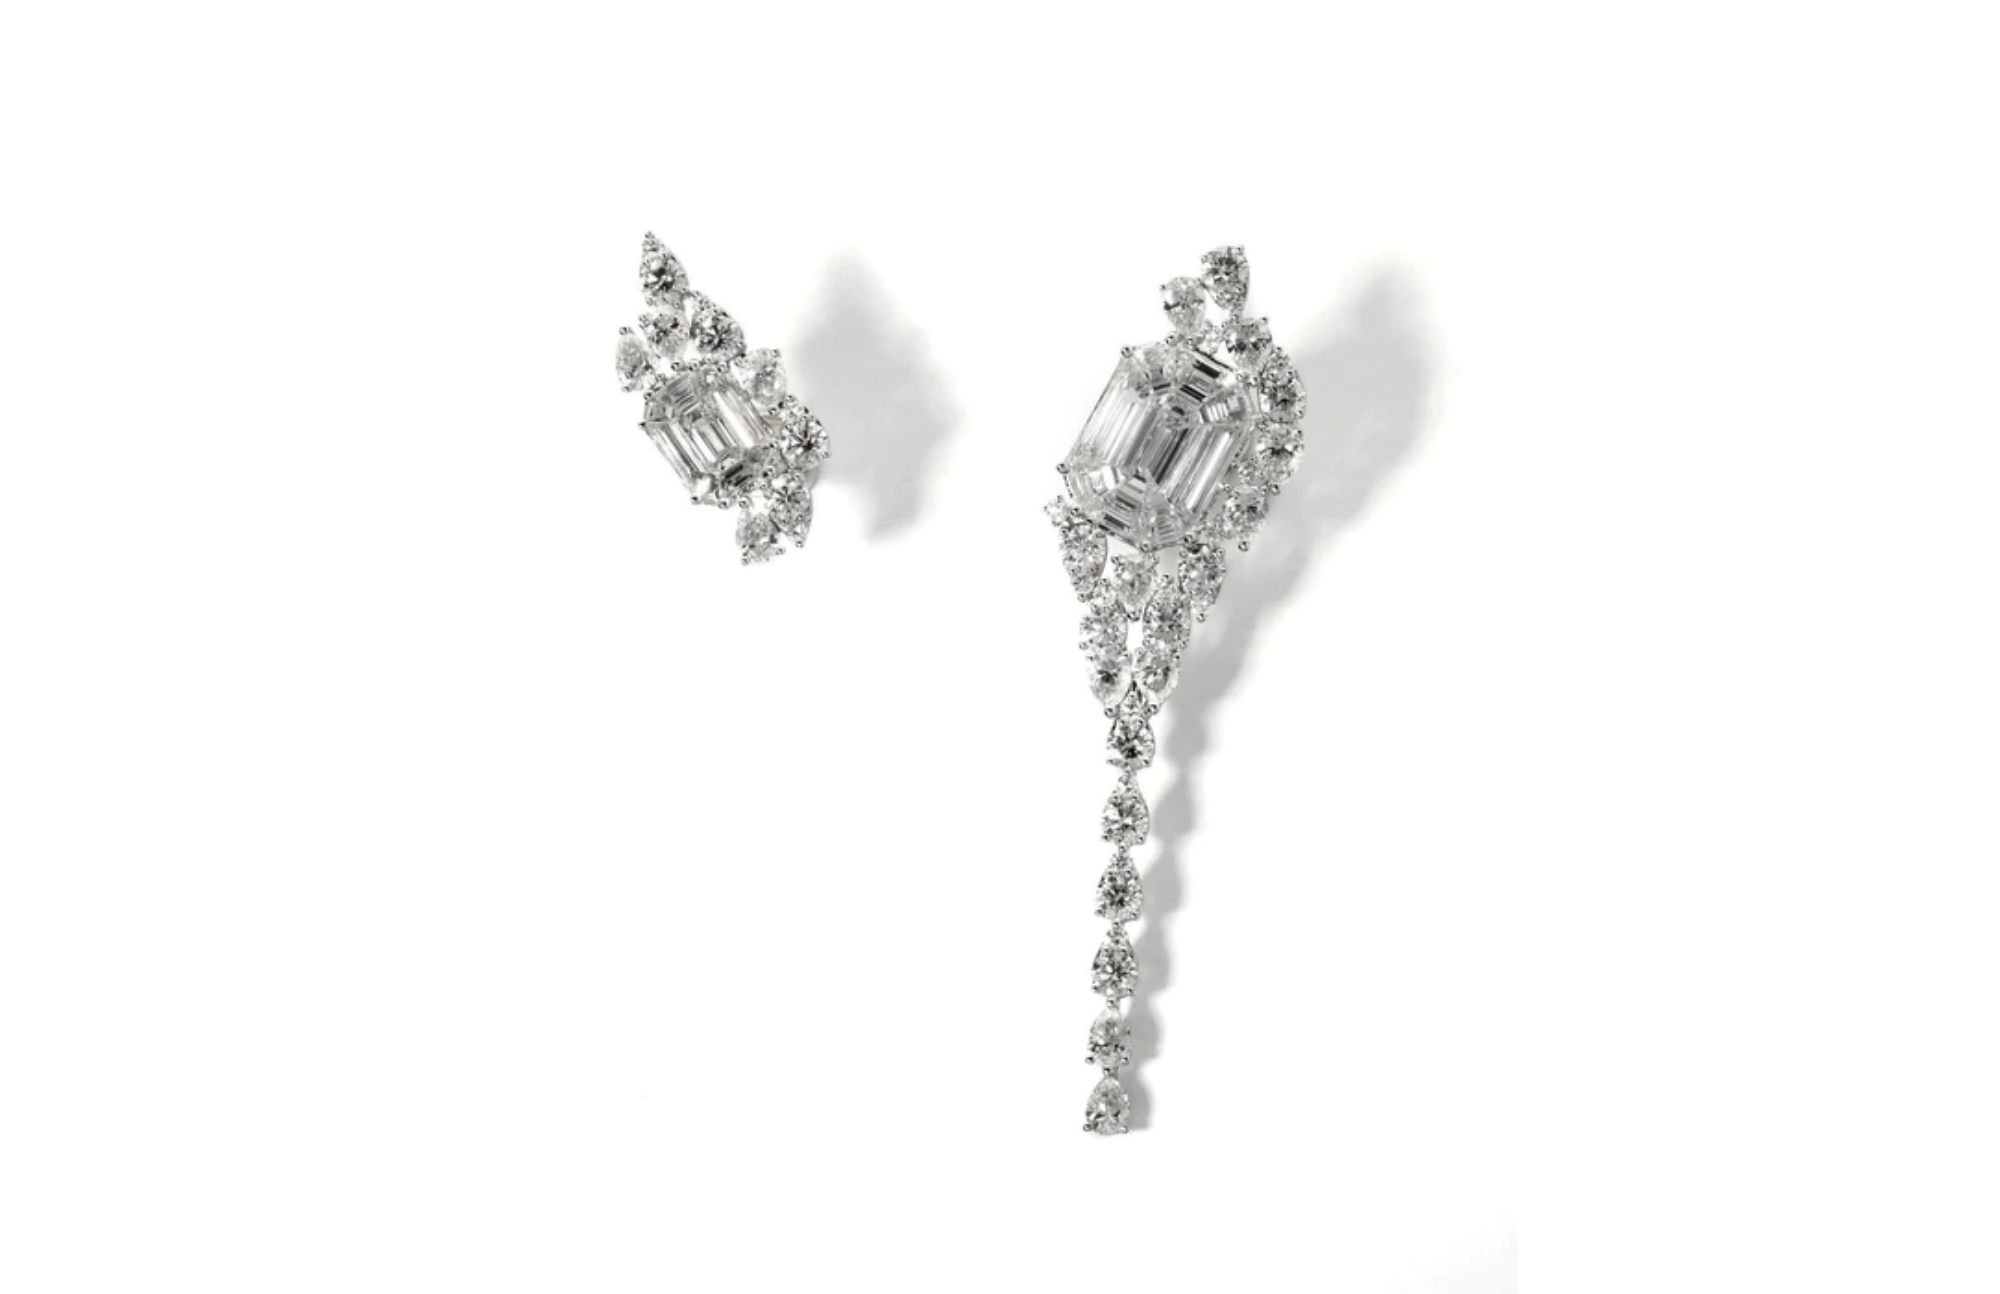 Long-tailed asymmetrical earring paired with small illusion diamond earring